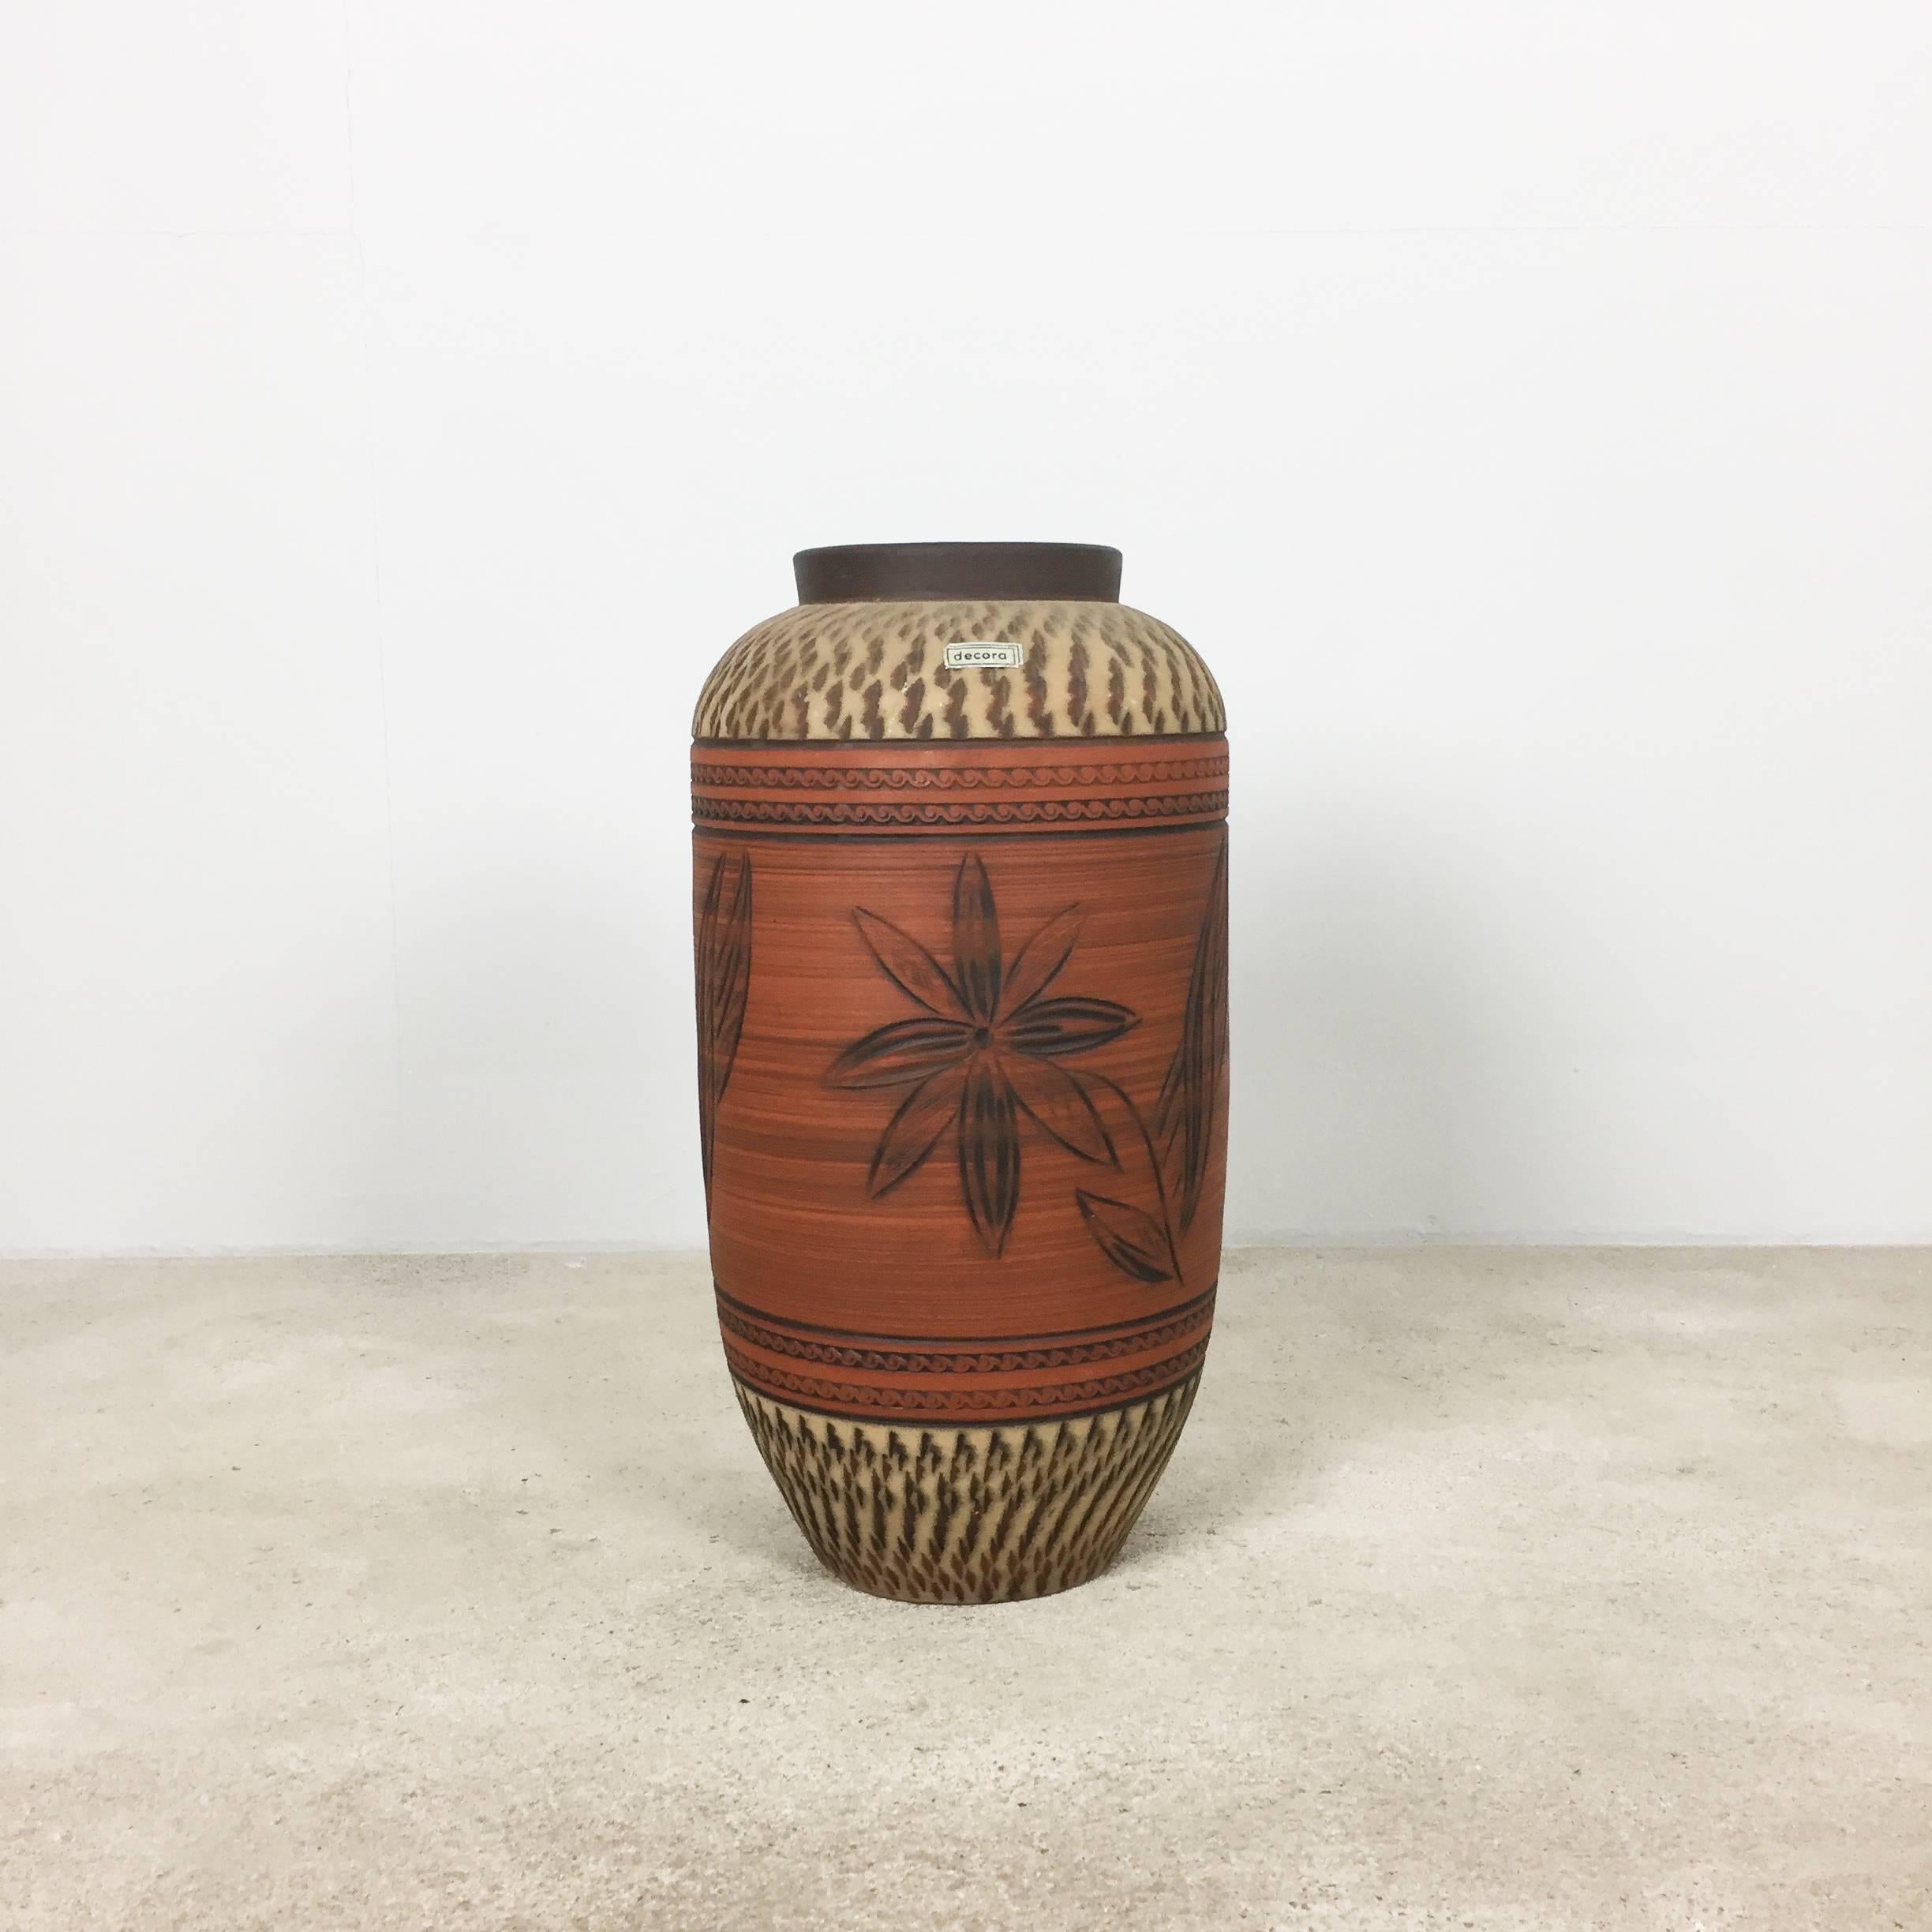 Article:

Pottery ceramic vase floor vase


Producer:

DECORA Ceramic, Germany



Decade:

1960s





Original vintage 1960s pottery ceramic vase made in Germany. High quality German production with a nice abstract painting. The